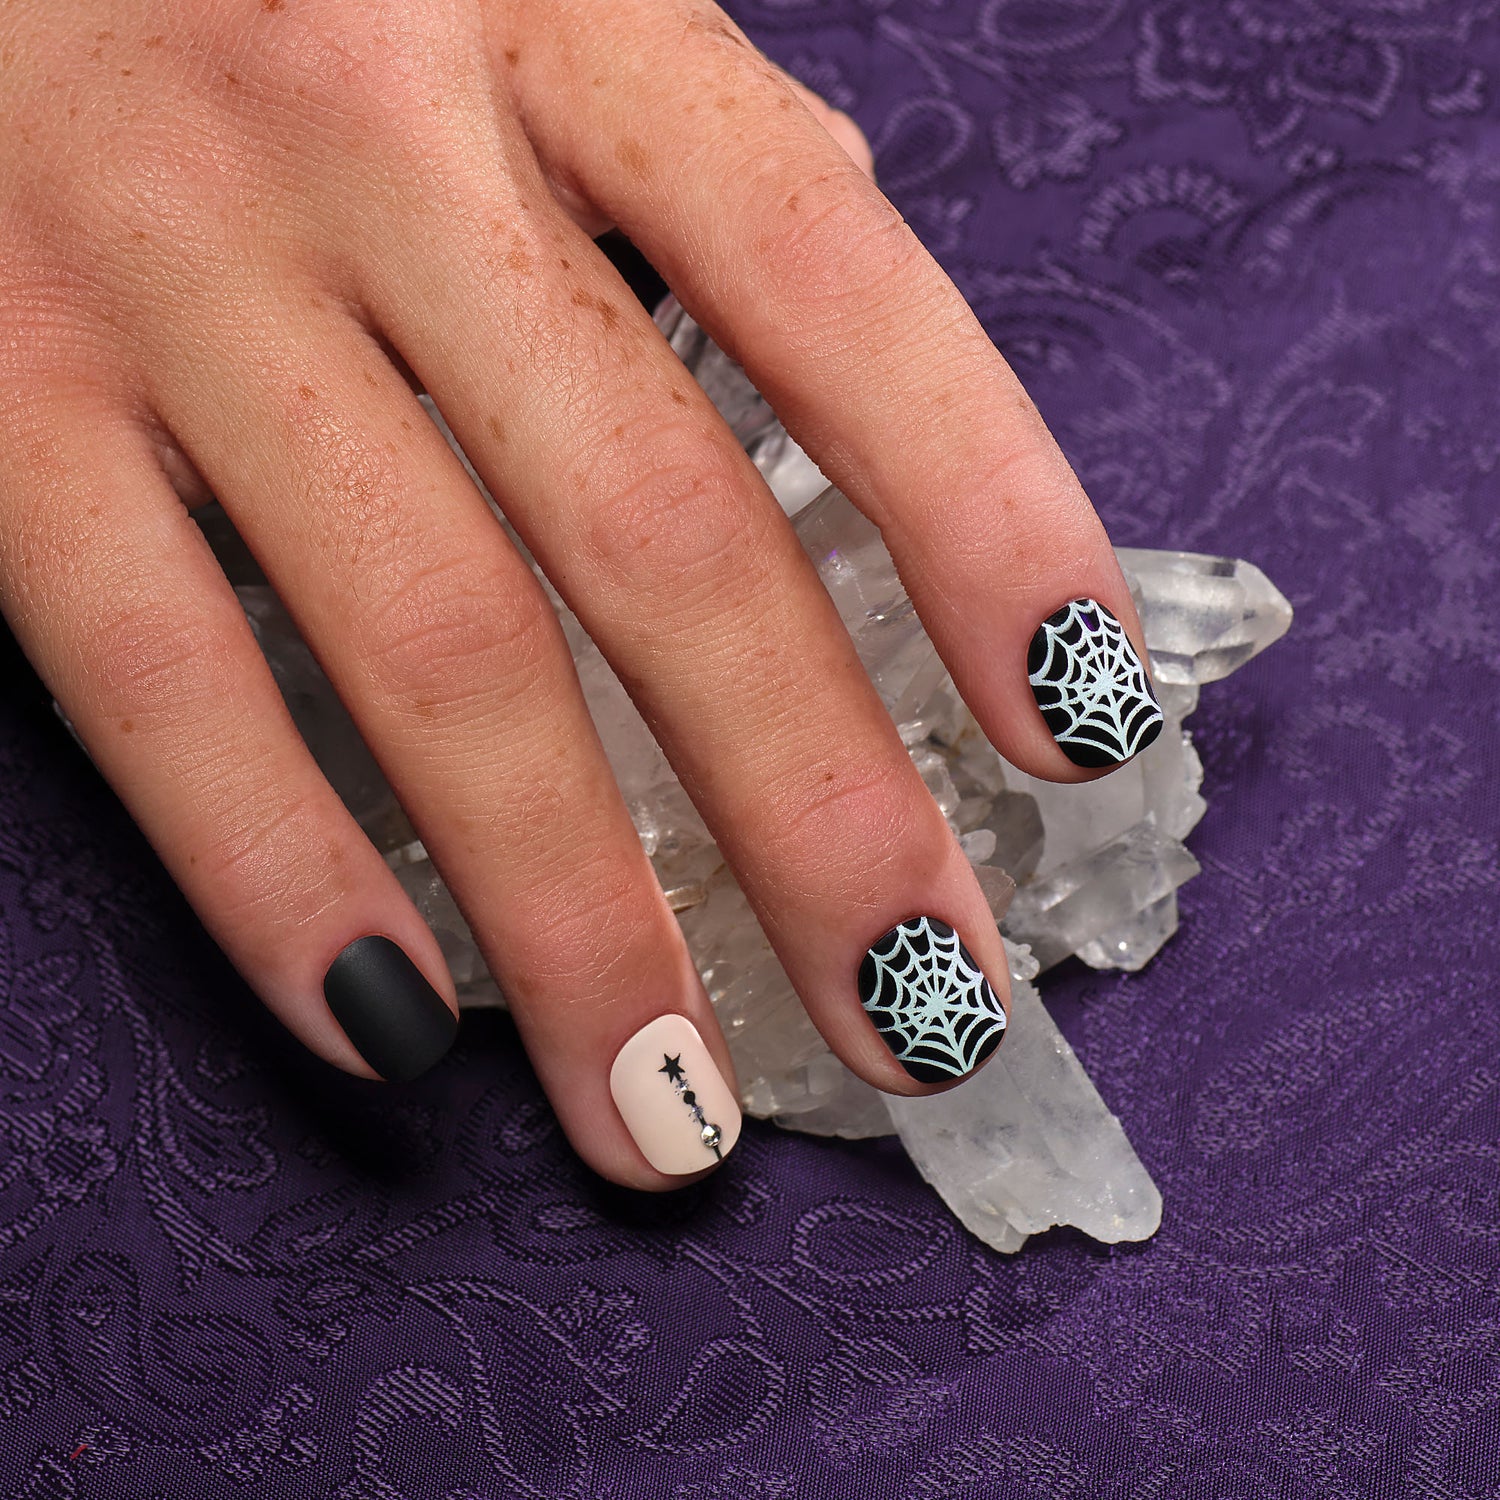 Short length, square shape, glossy & matte black press-on gel nails featuring silver spiderwebs, rhinestones, and line art accents with Glow in the dark details.